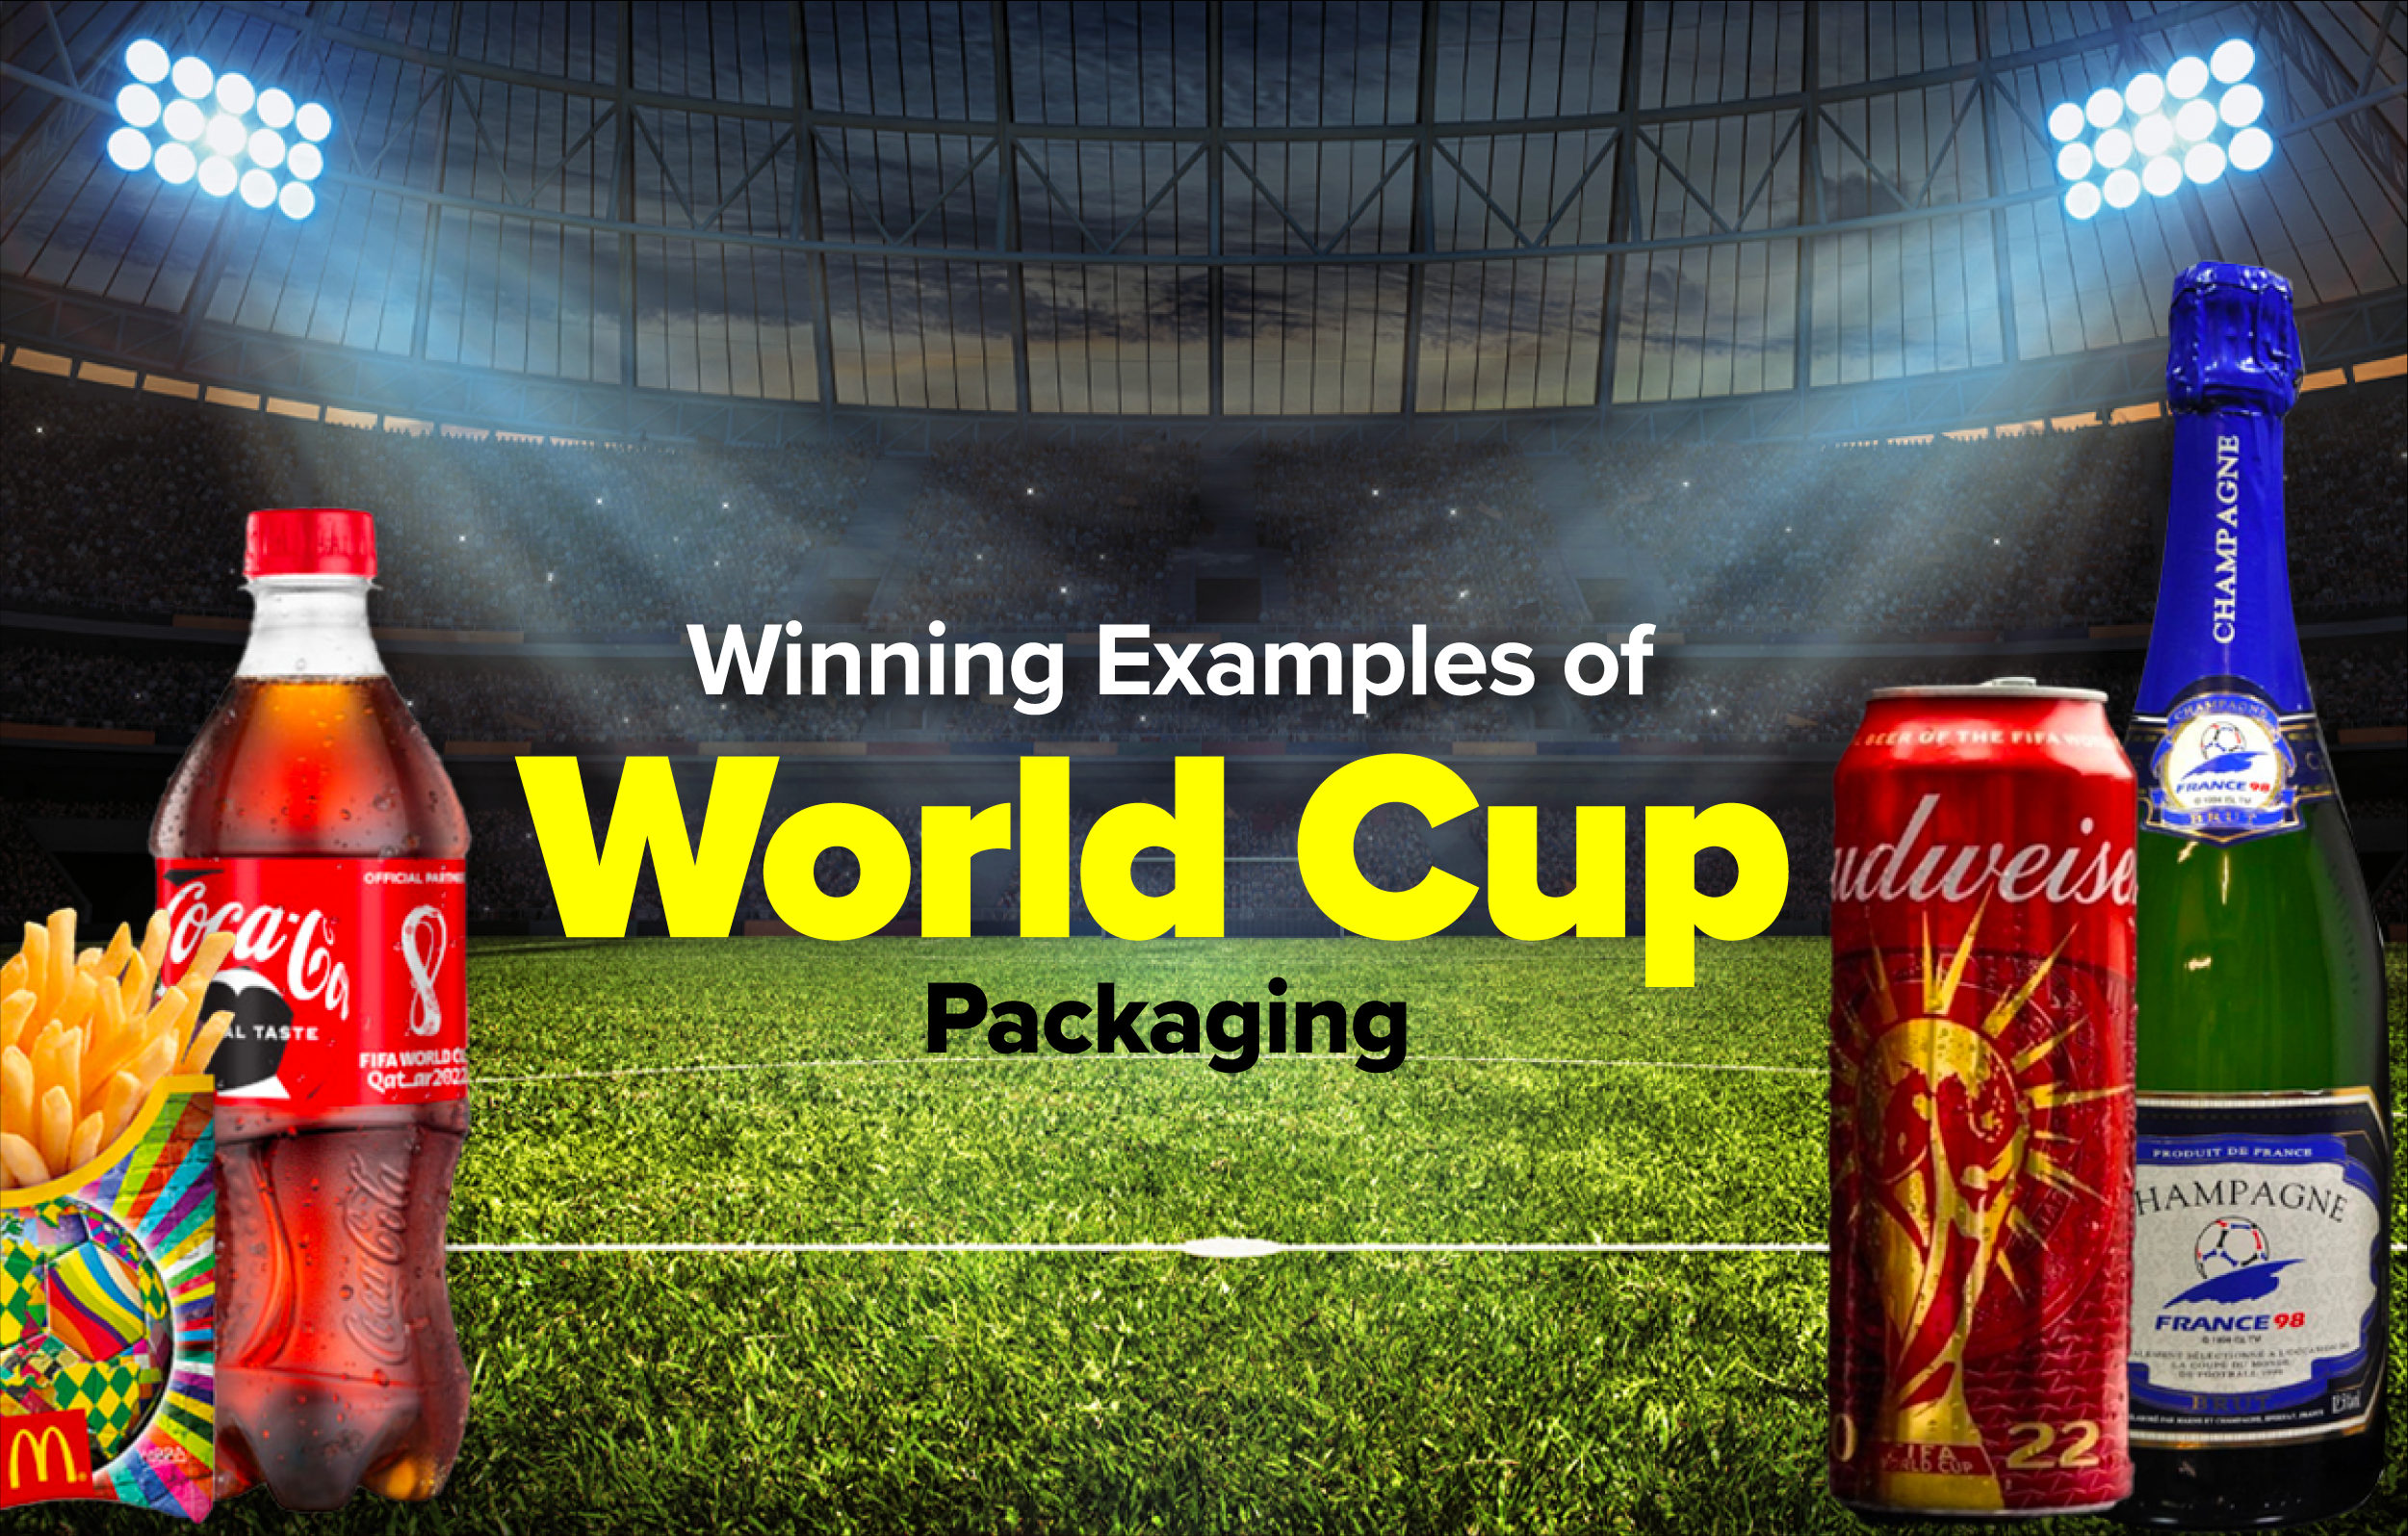 World Cup Packaging